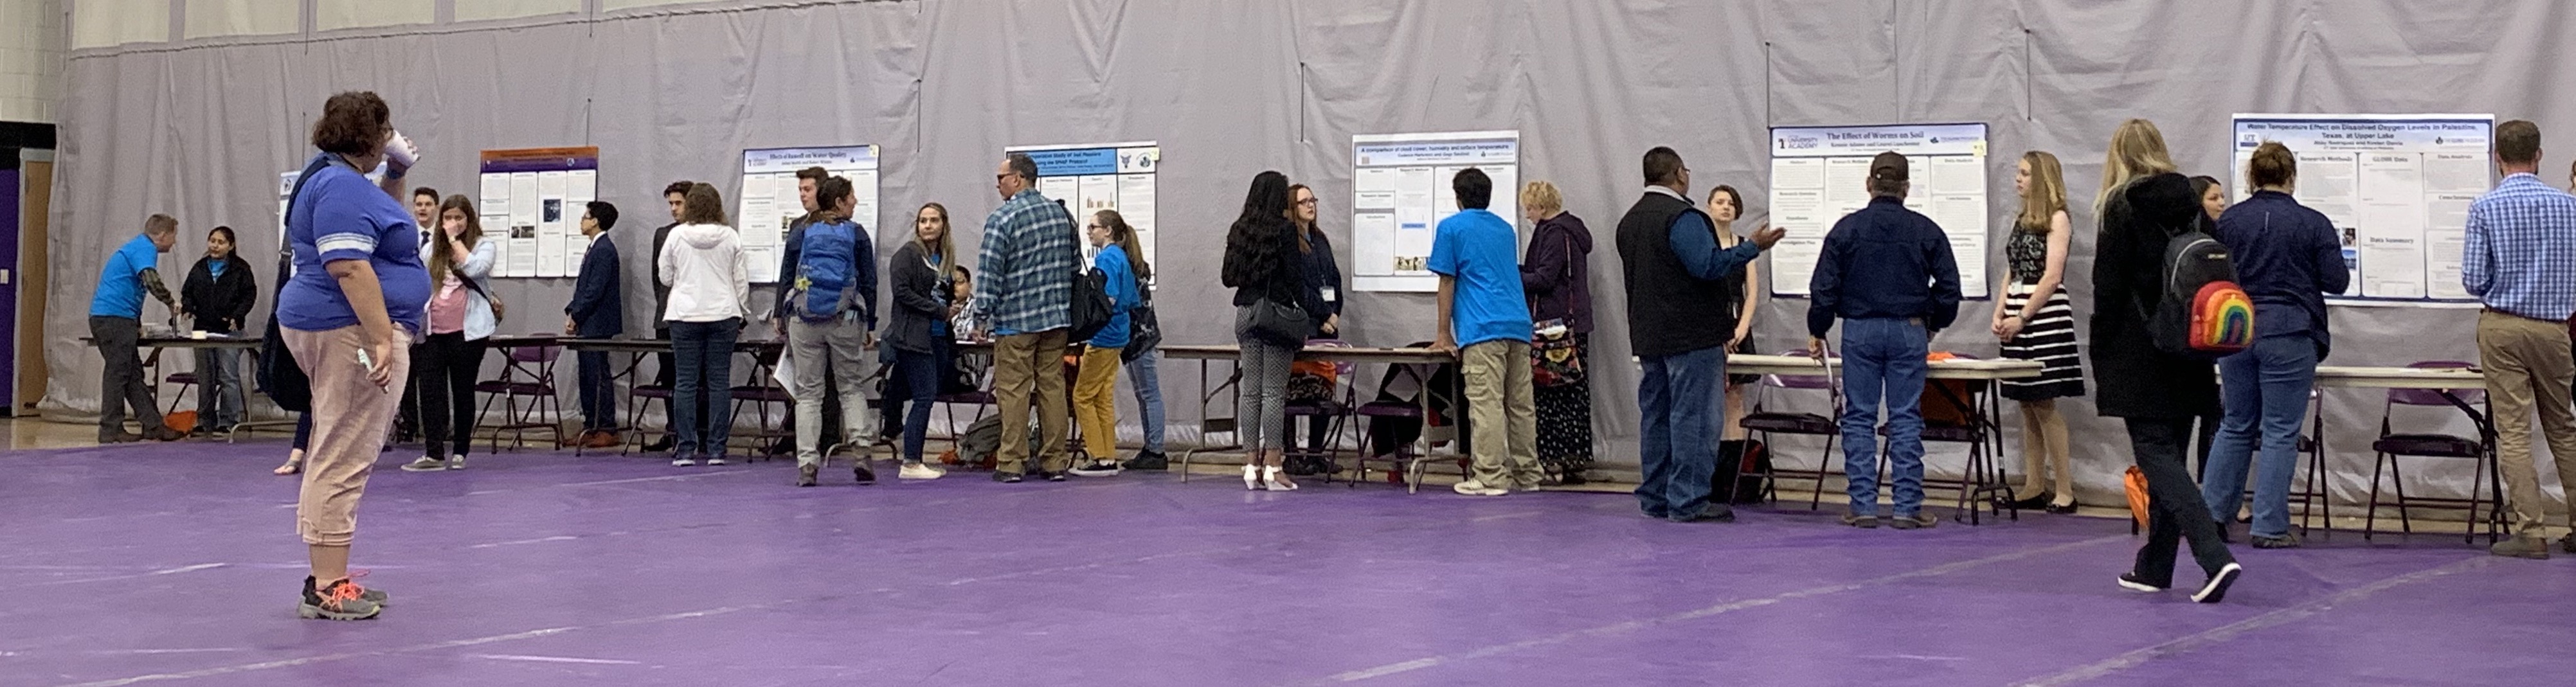 a gym with posters taped to the wall with students presenting to adults and other students along it.